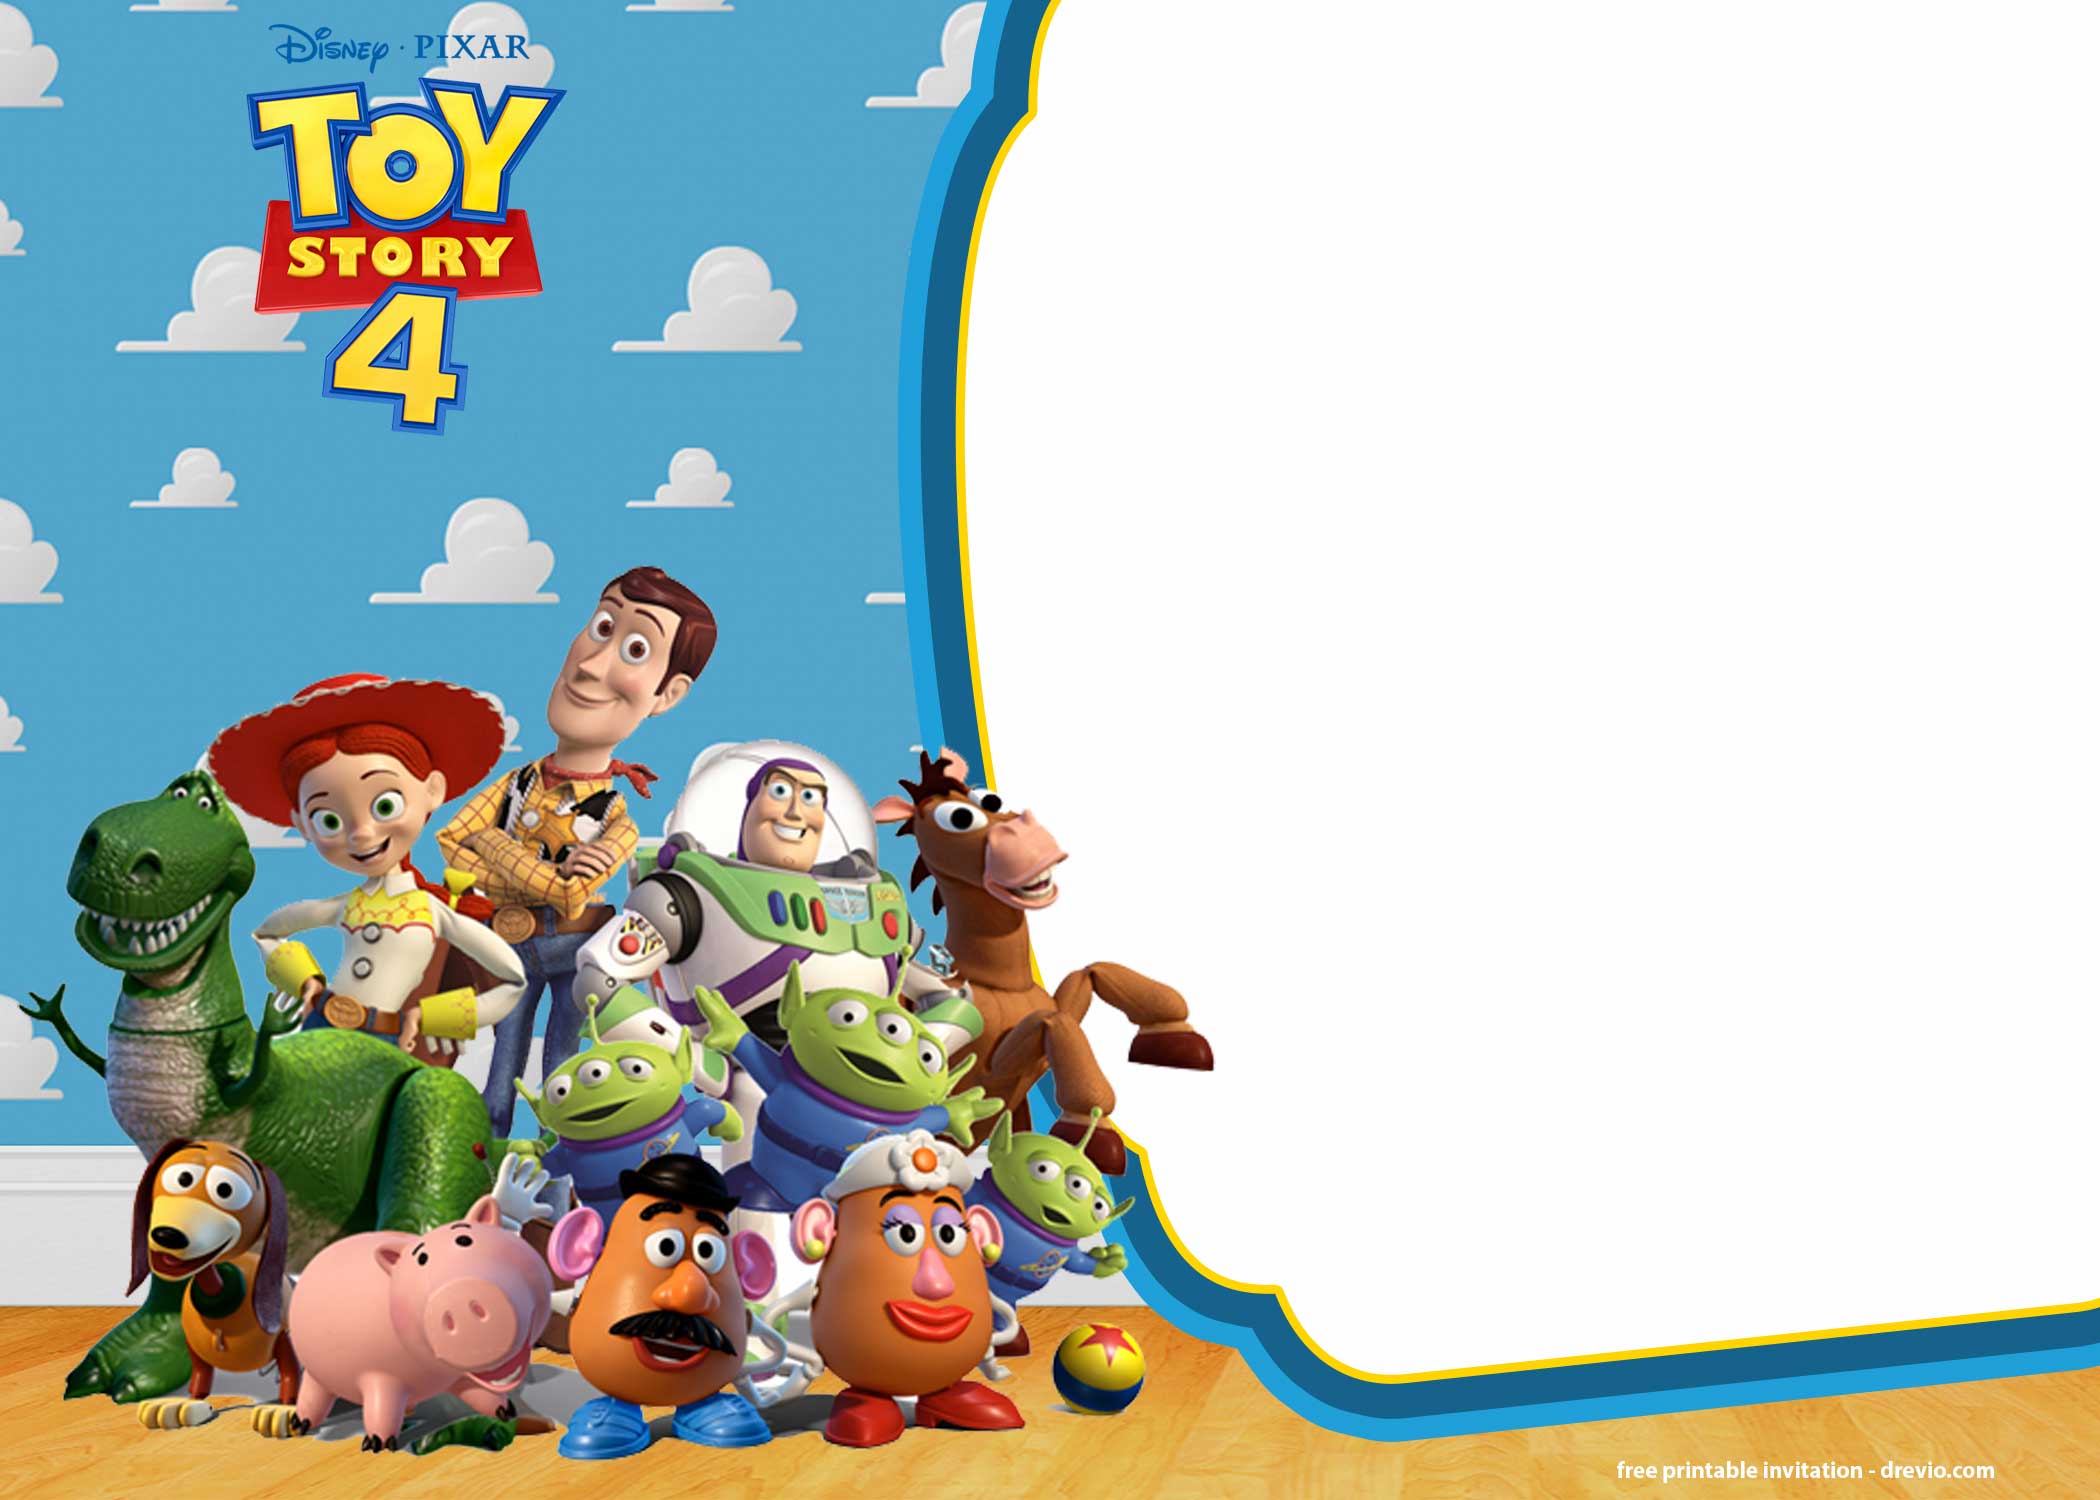 FREE Printable Toy Story 4 Invitation Templates Download Hundreds